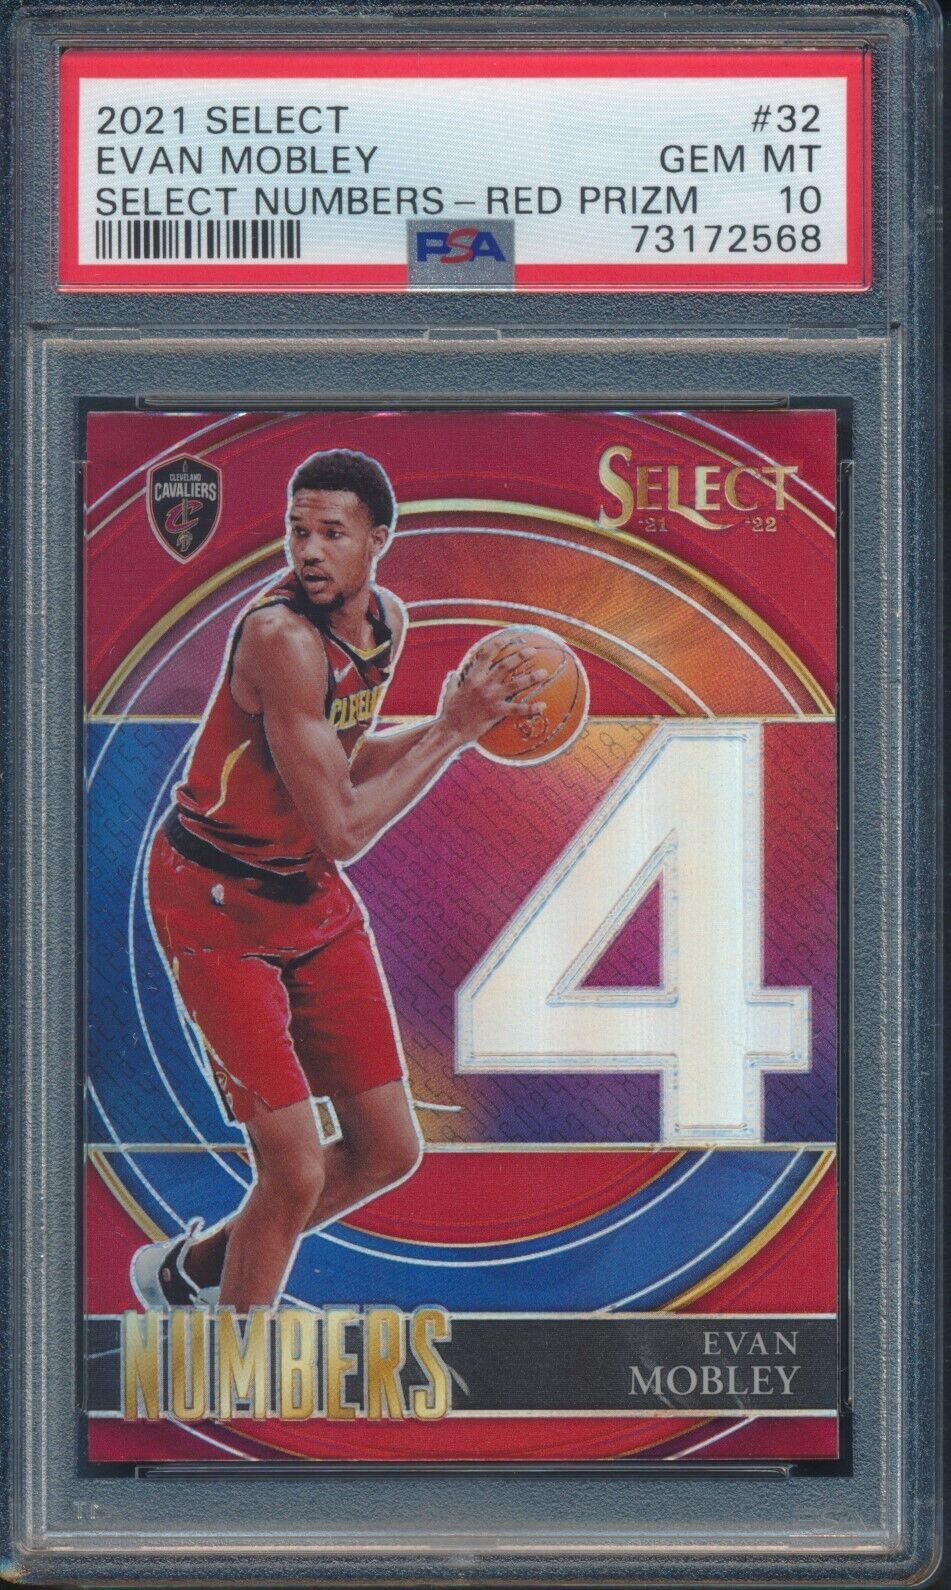 2021 Panini Select SELECT NUMBERS RED PRIZM Evan Mobley RC #32 PSA 10 CAVALIERS